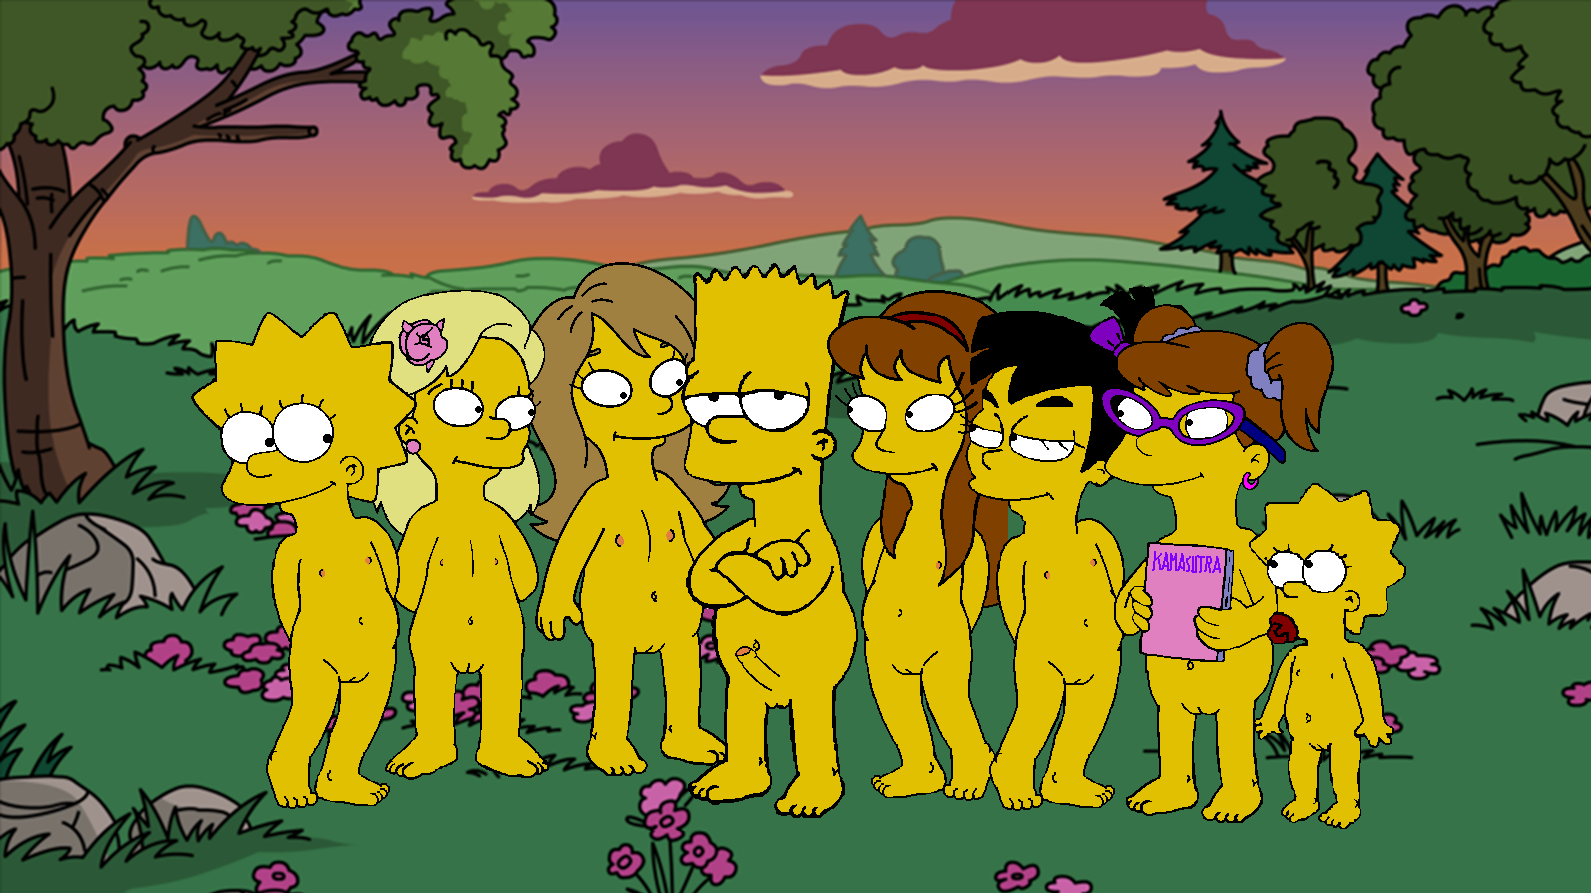 Free naked visa of the simpsons.